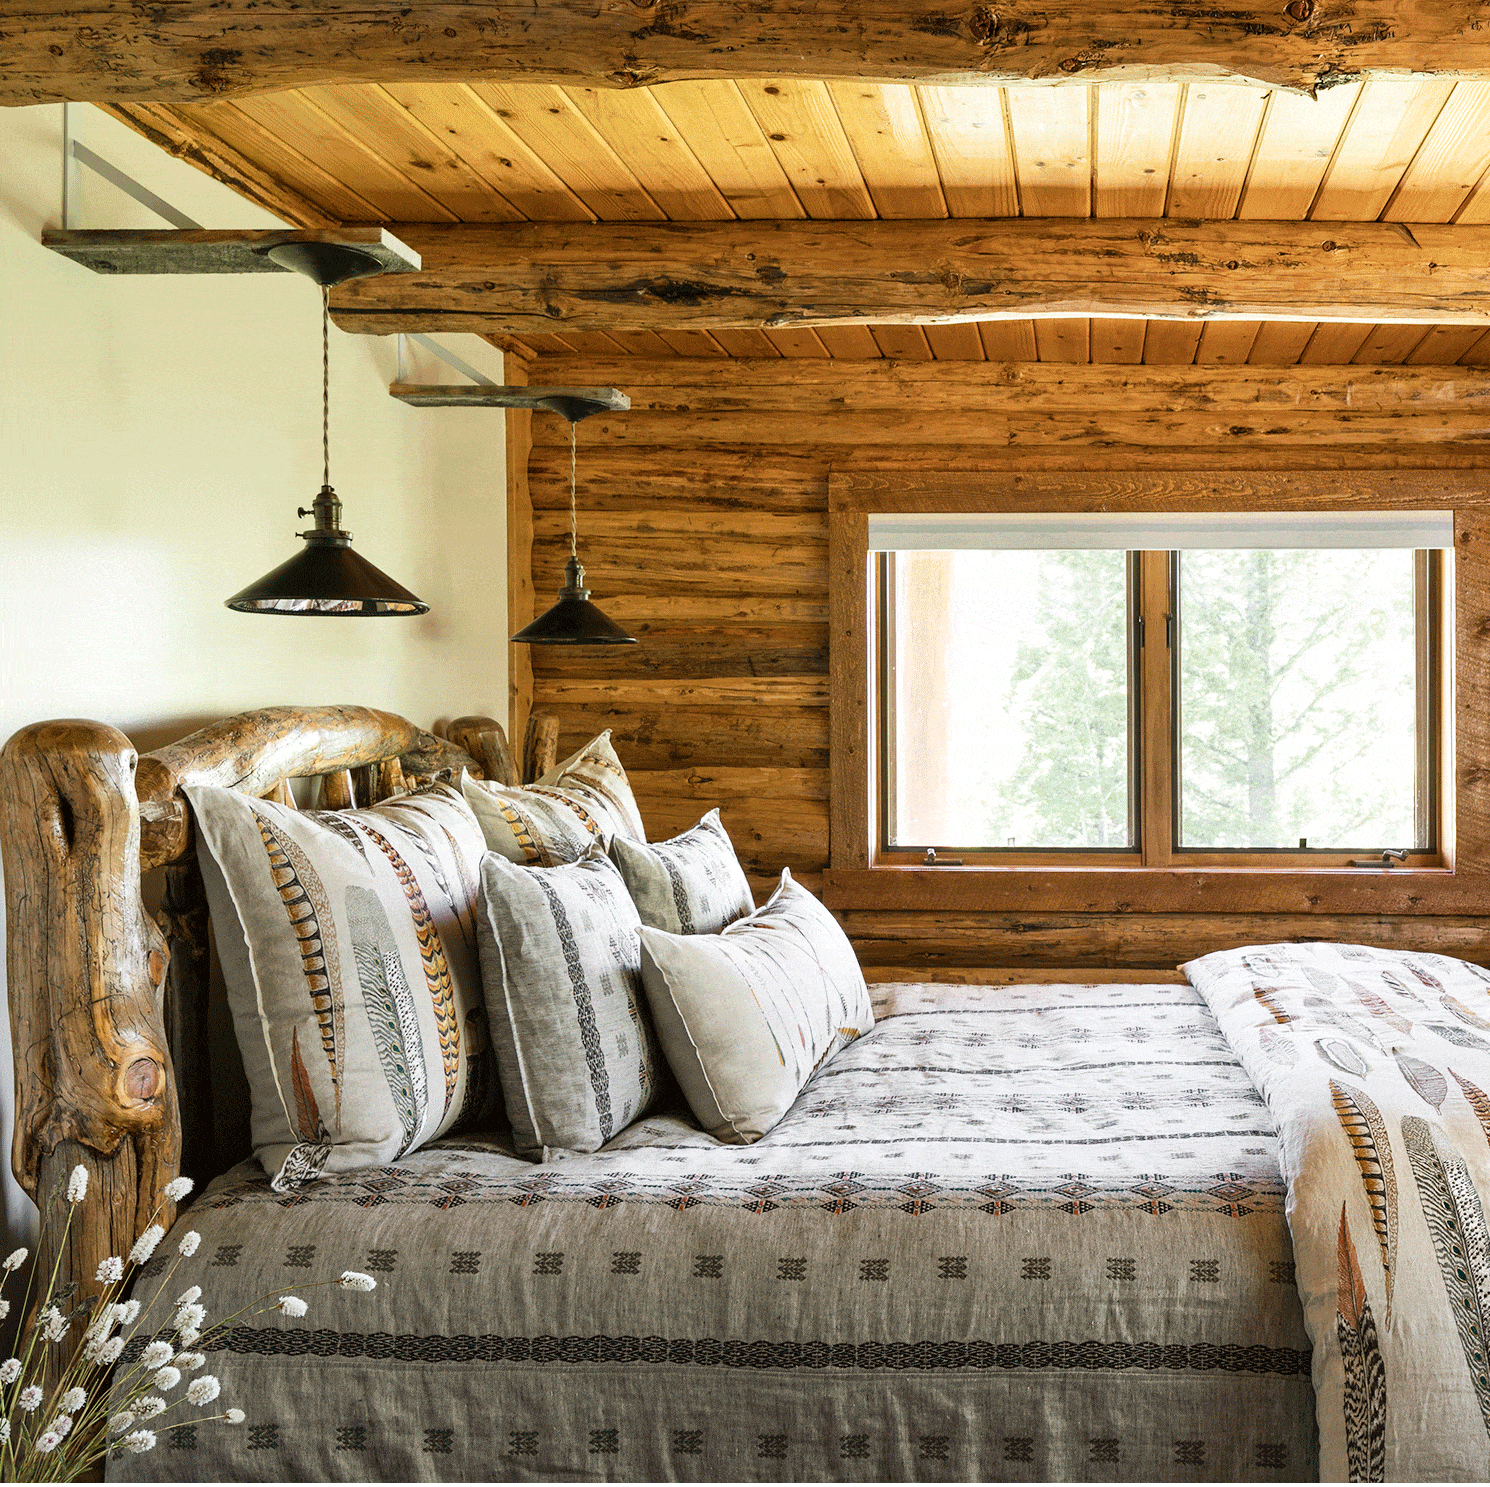 14 rustic bedroom ideas - rustic decorating tips for bedrooms